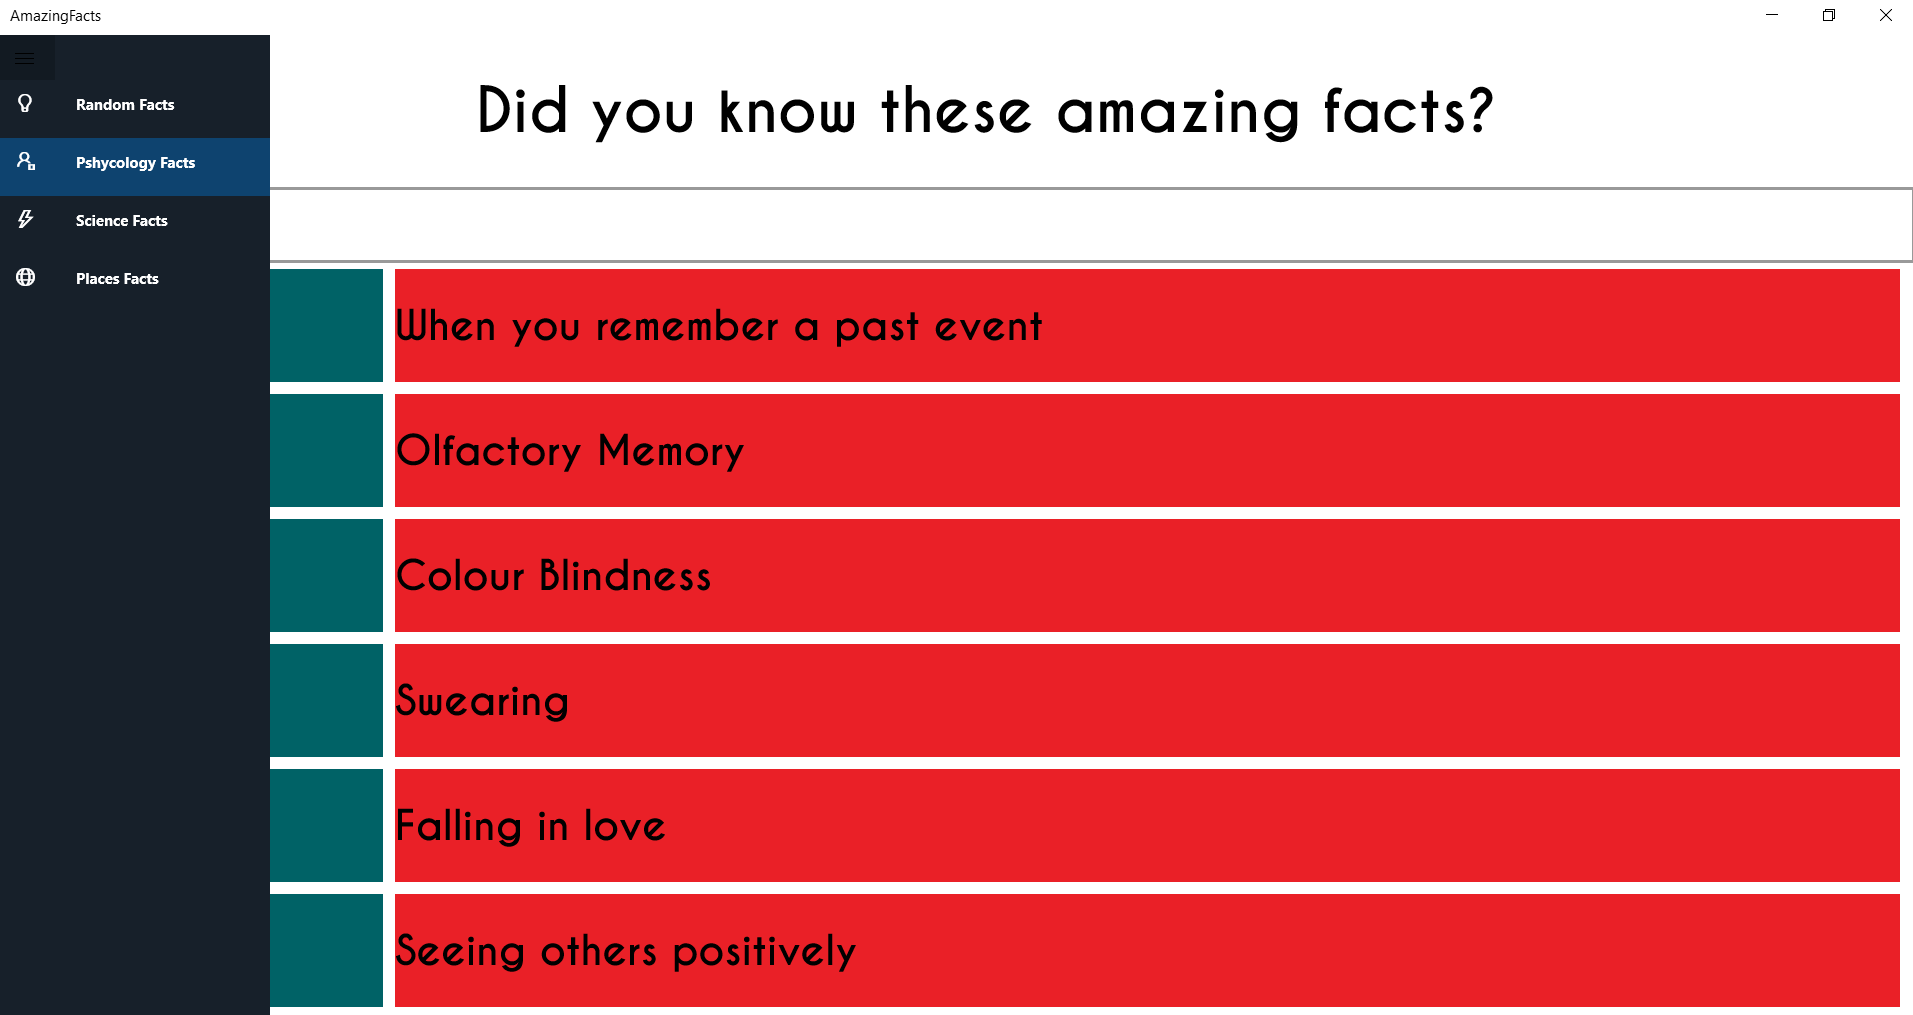 Amazing facts-Did you know?